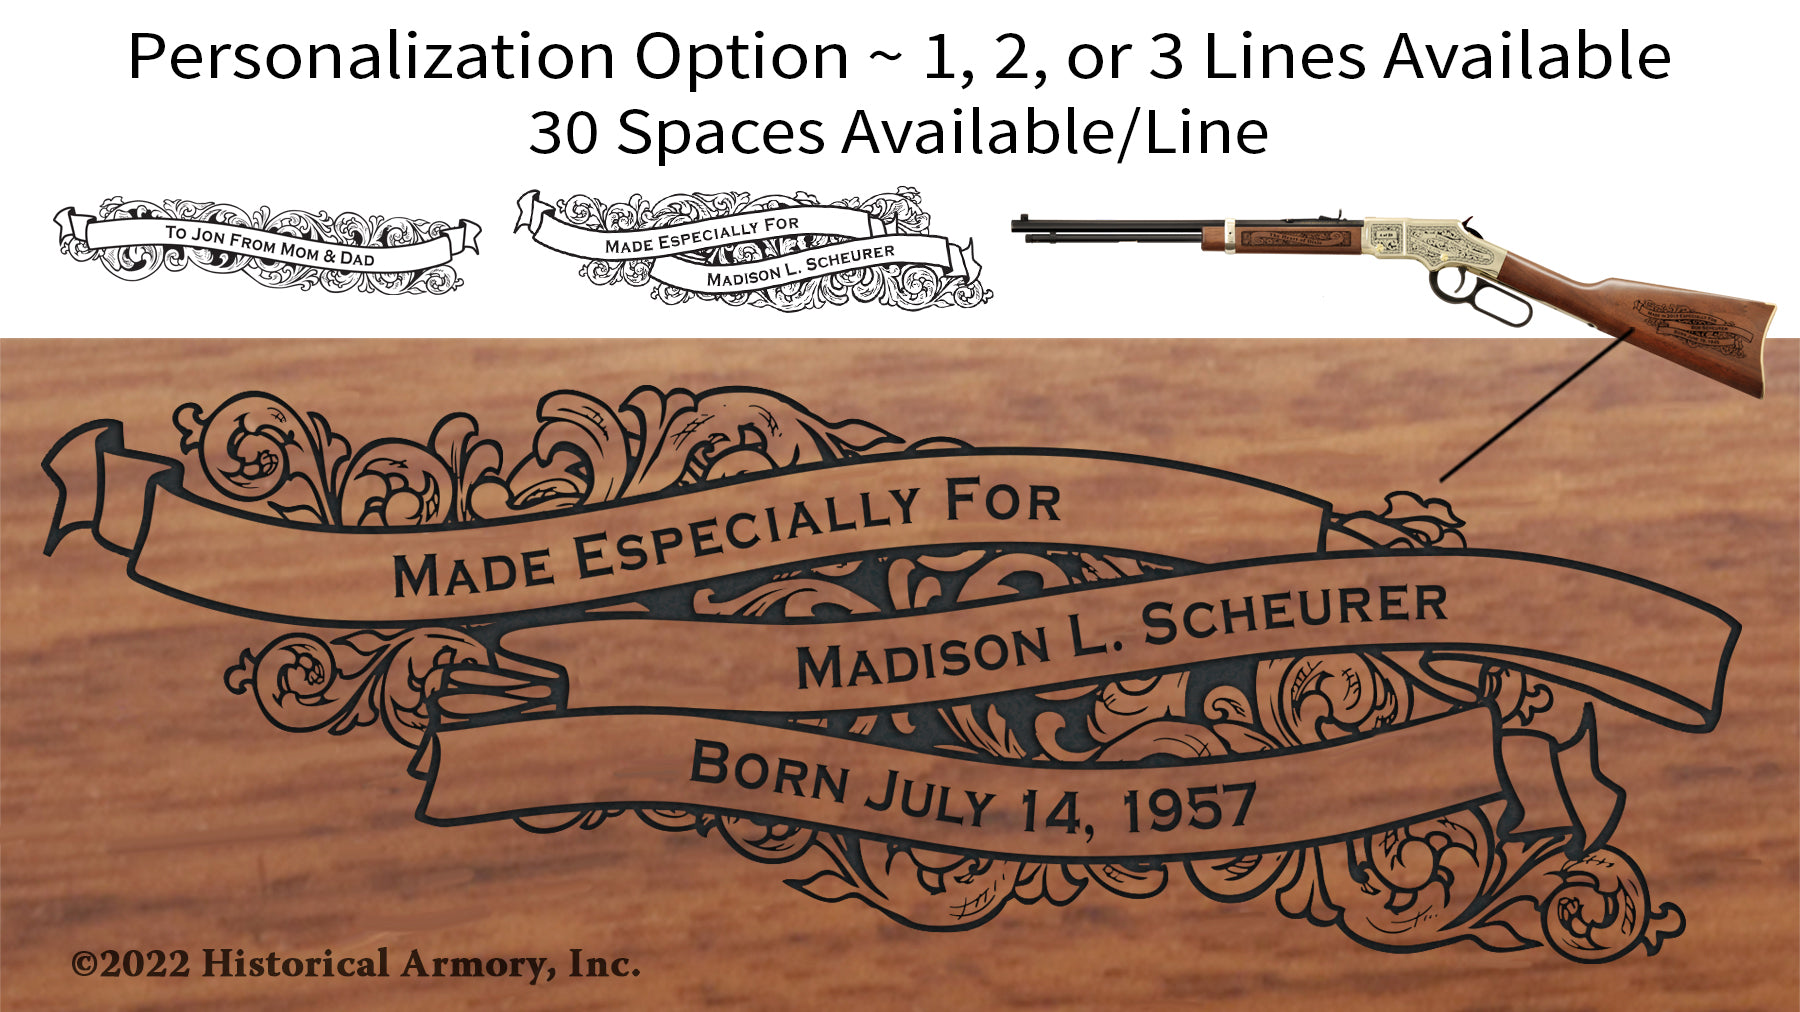 Shelby County Indiana Engraved Rifle Personalization